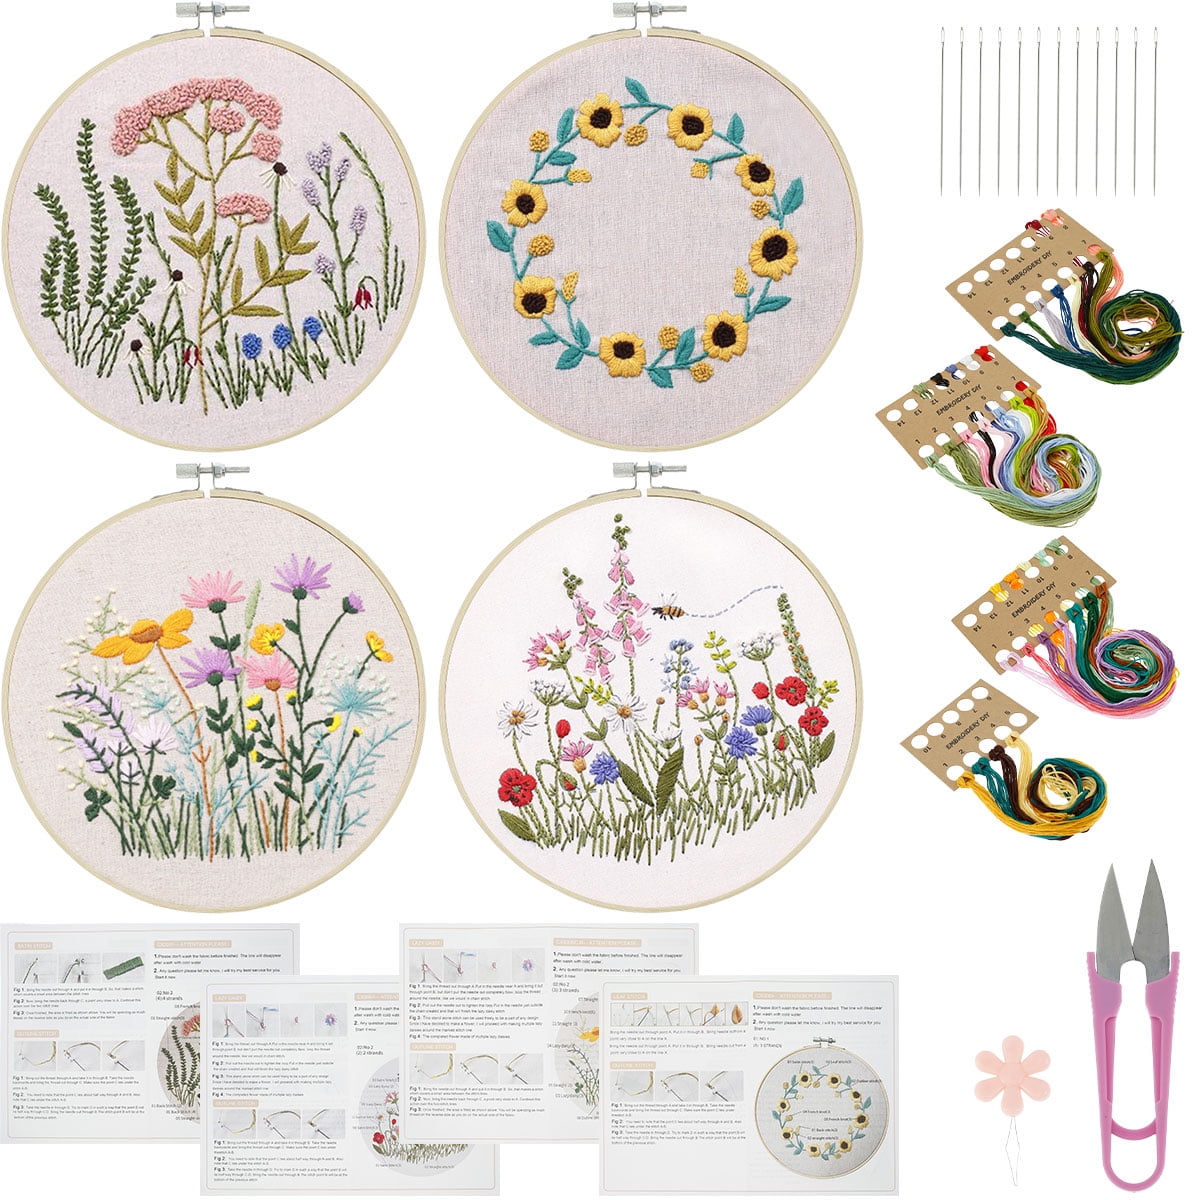 Jetcloudlive Embroidery Starter Kit Hand-Made Cross Stitch Kit with Pattern and Instructions Full Range of Embroidery Kits Embroidery Hoops DIY